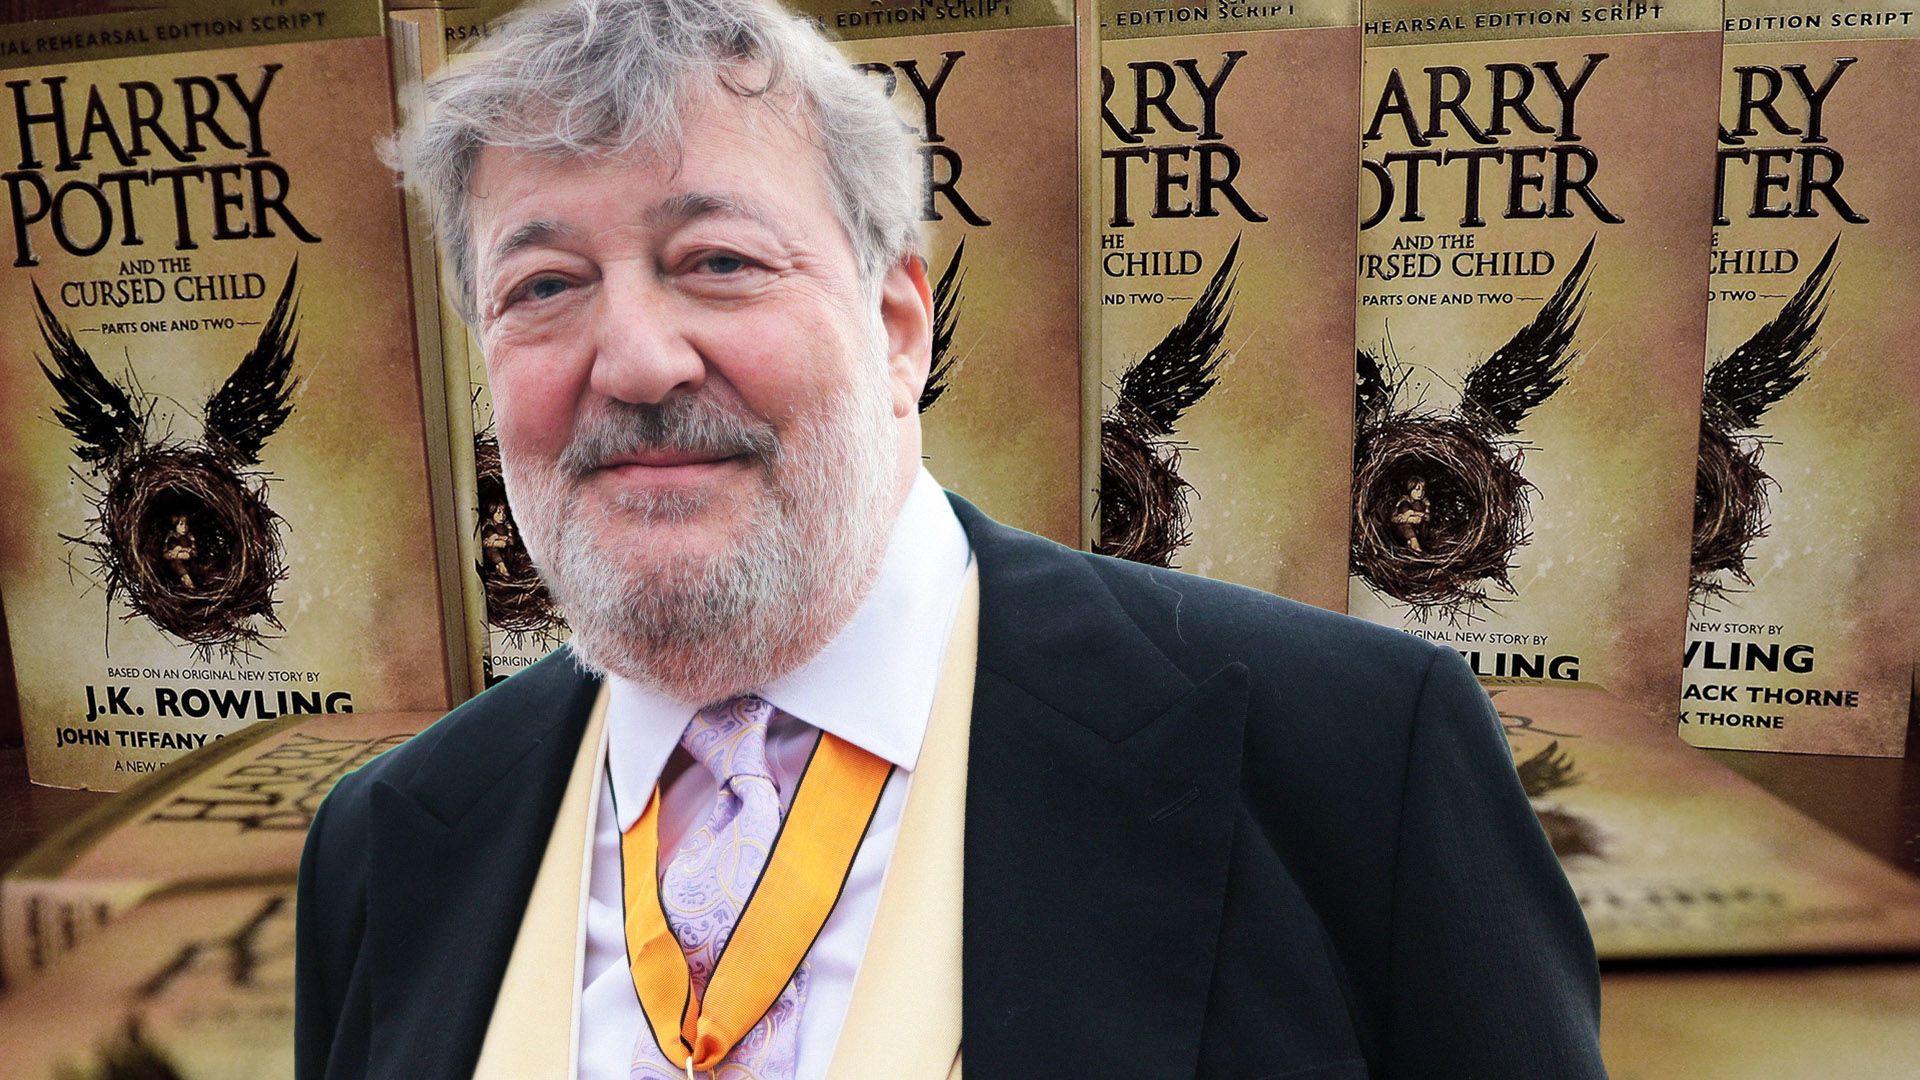 Stephen Fry Warns Against AI After His Voice Was ‘Stolen’ From Harry Potter Audiobooks